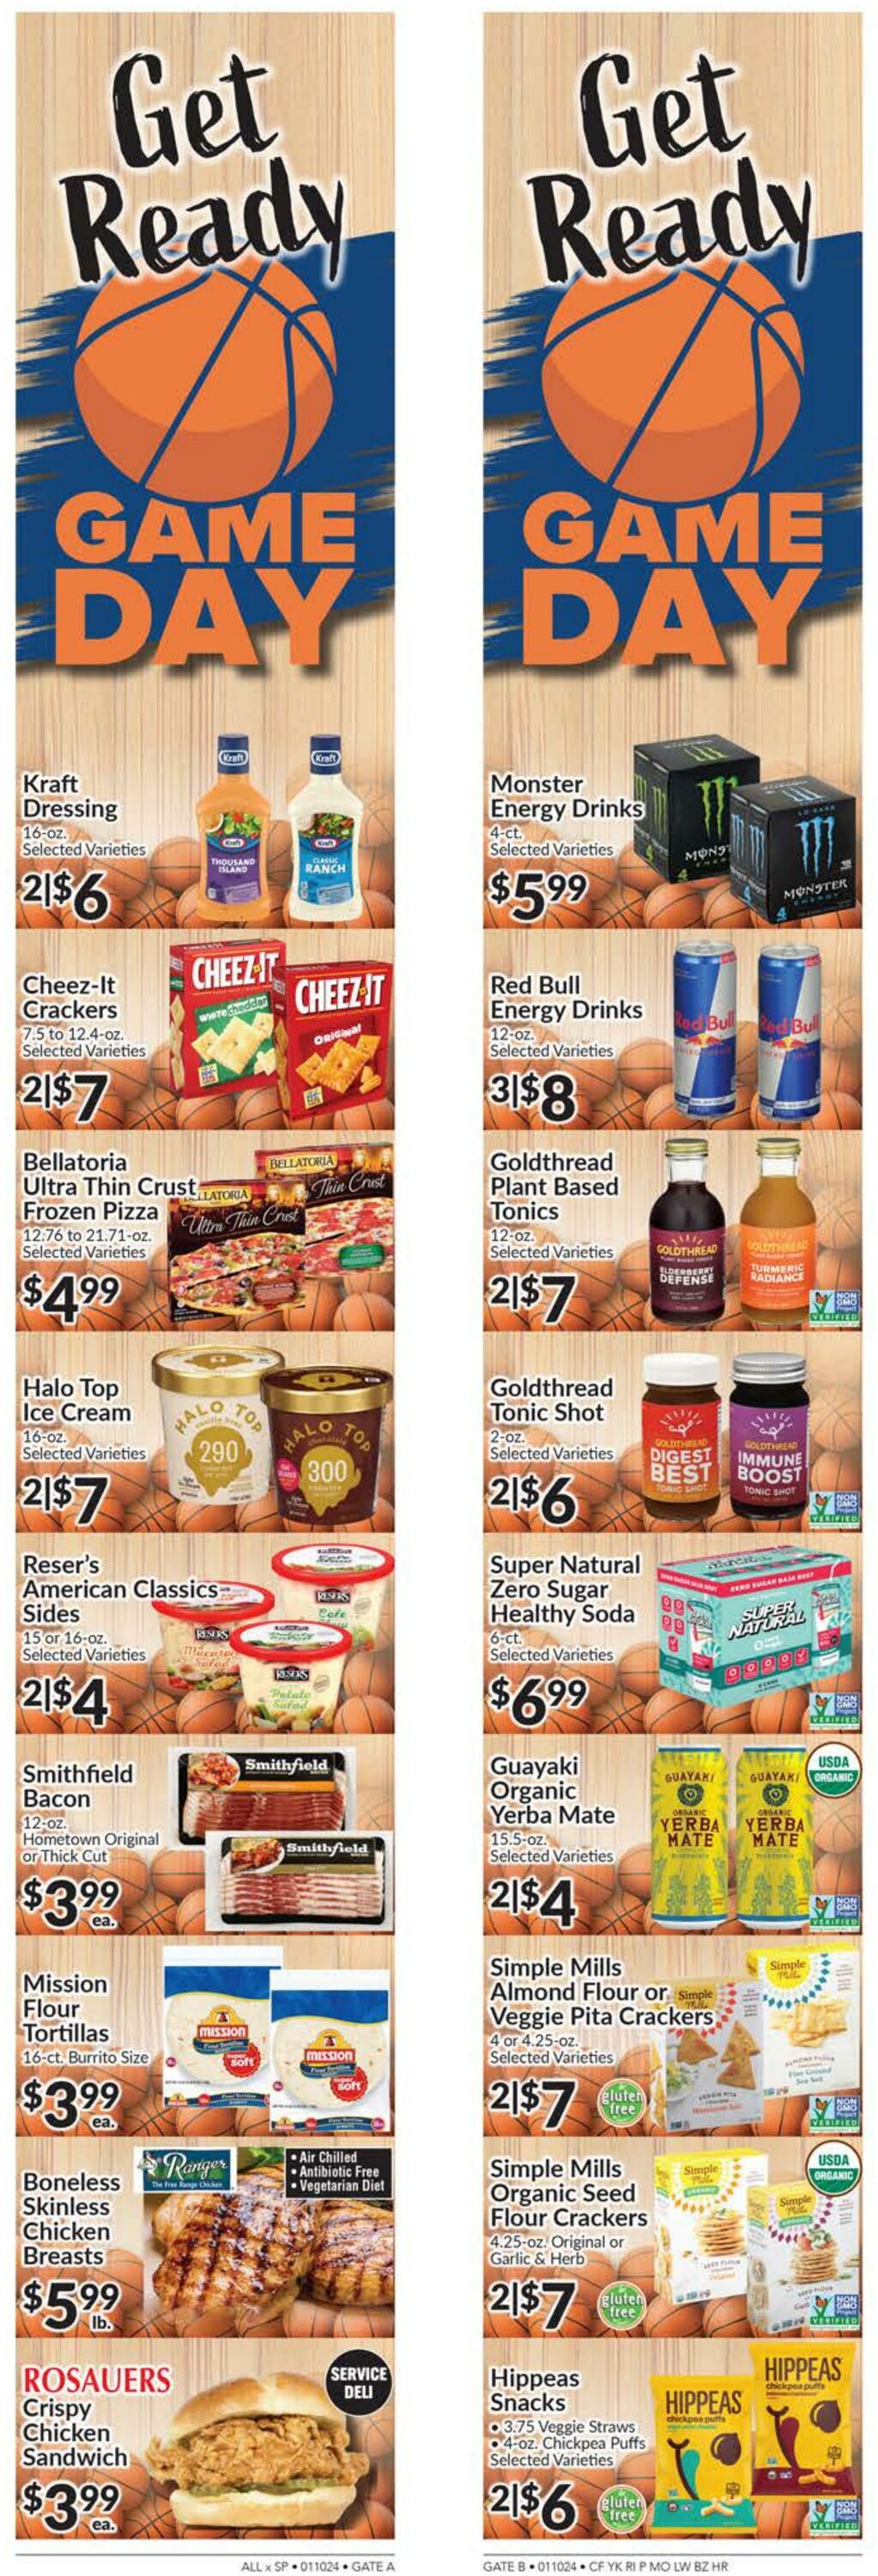 Weekly ad Rosauers 01/10/2024 - 01/16/2024